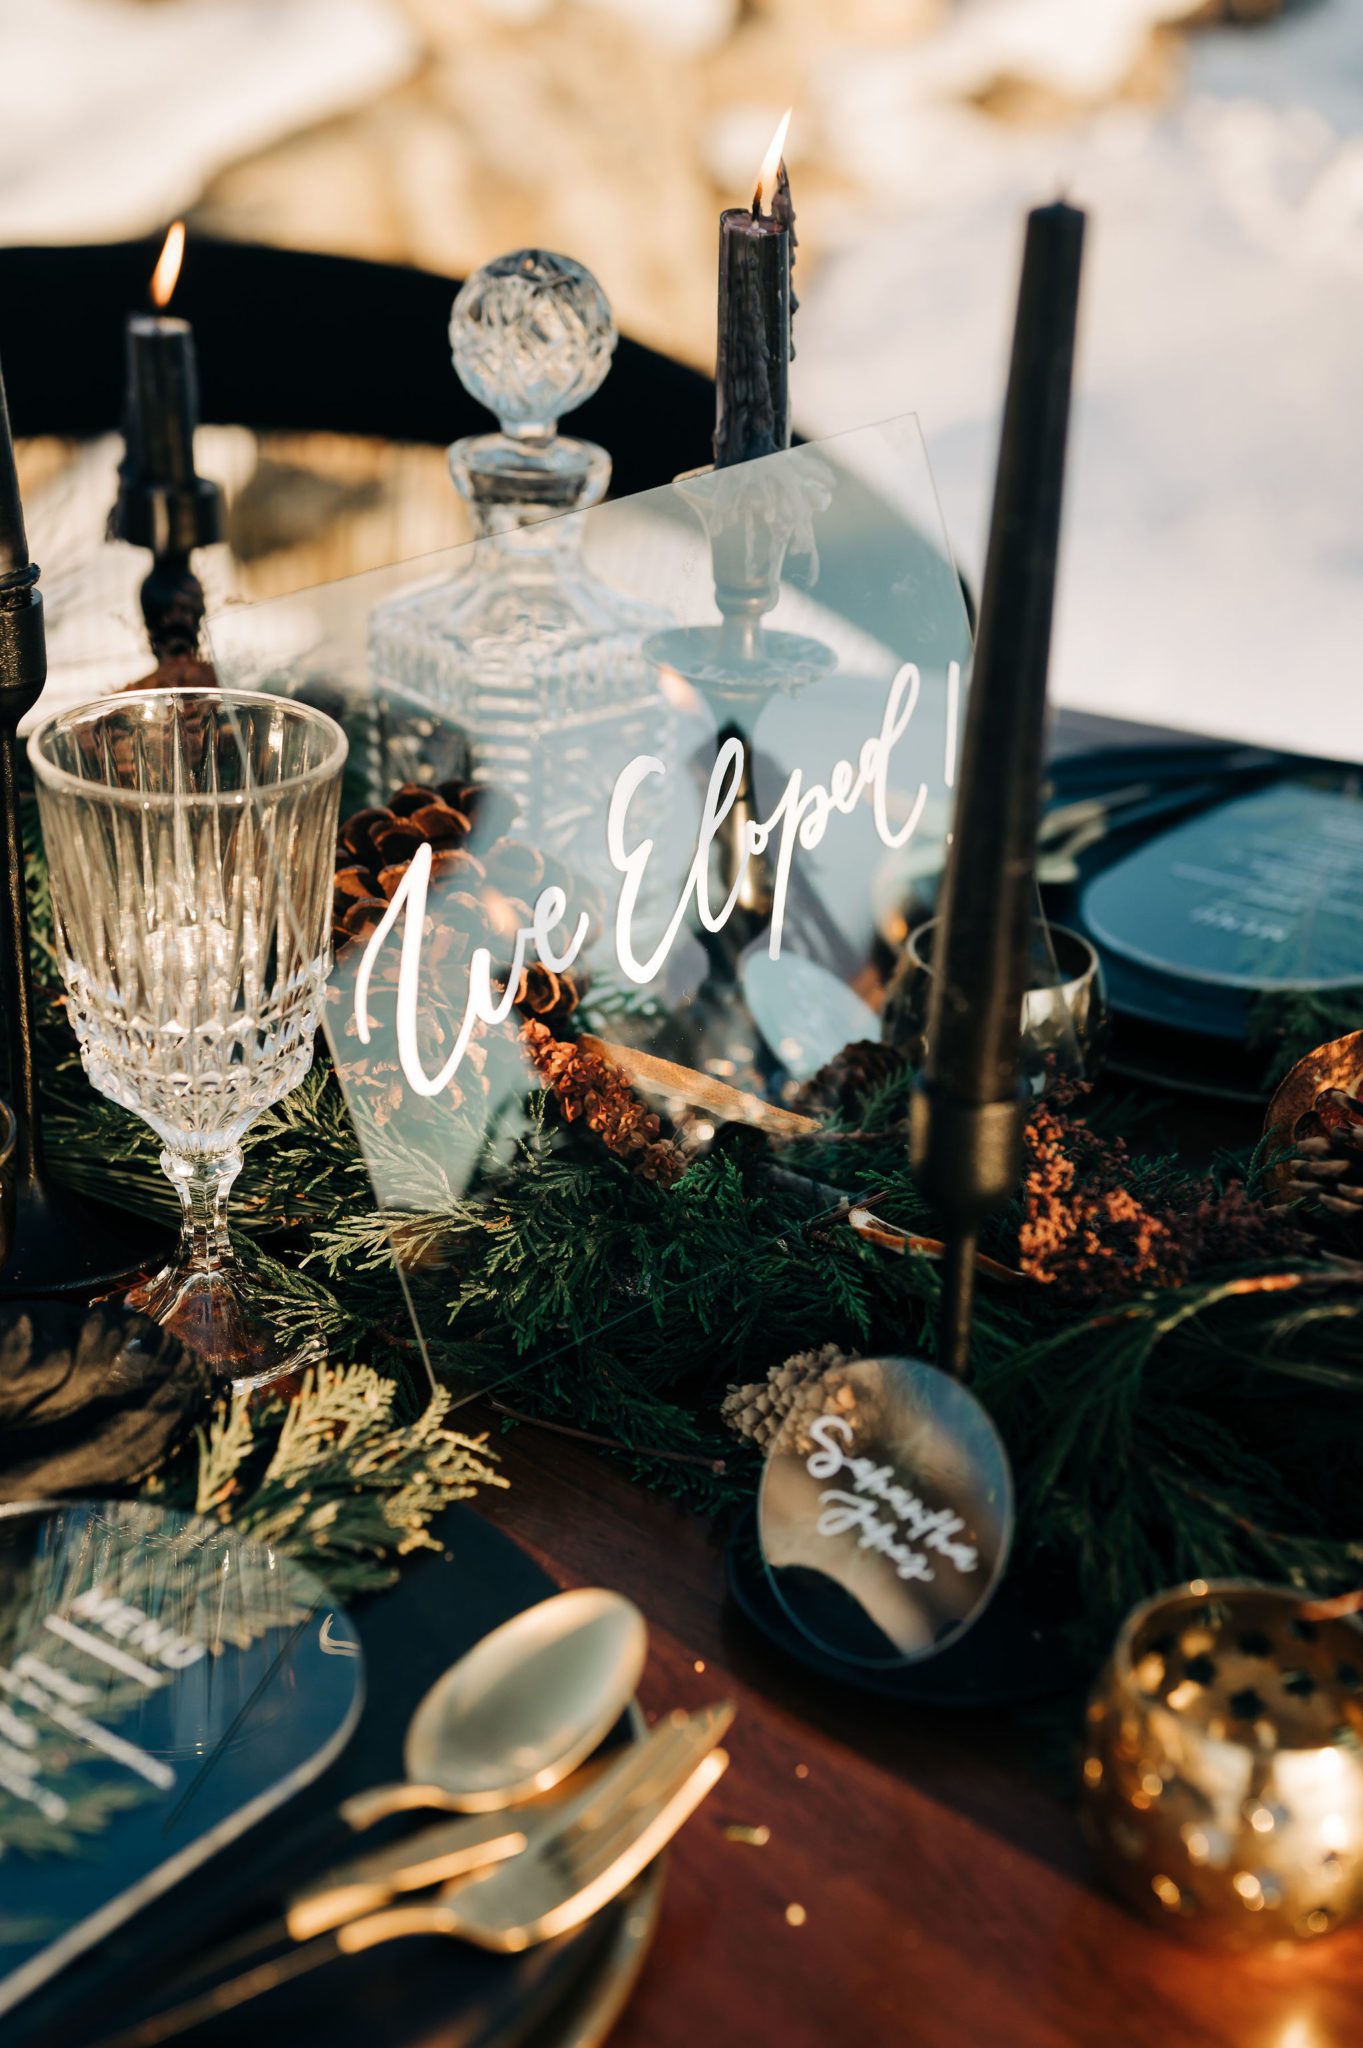 Outdoor table scape with acrylic signage, candle lit elopement at golden hour